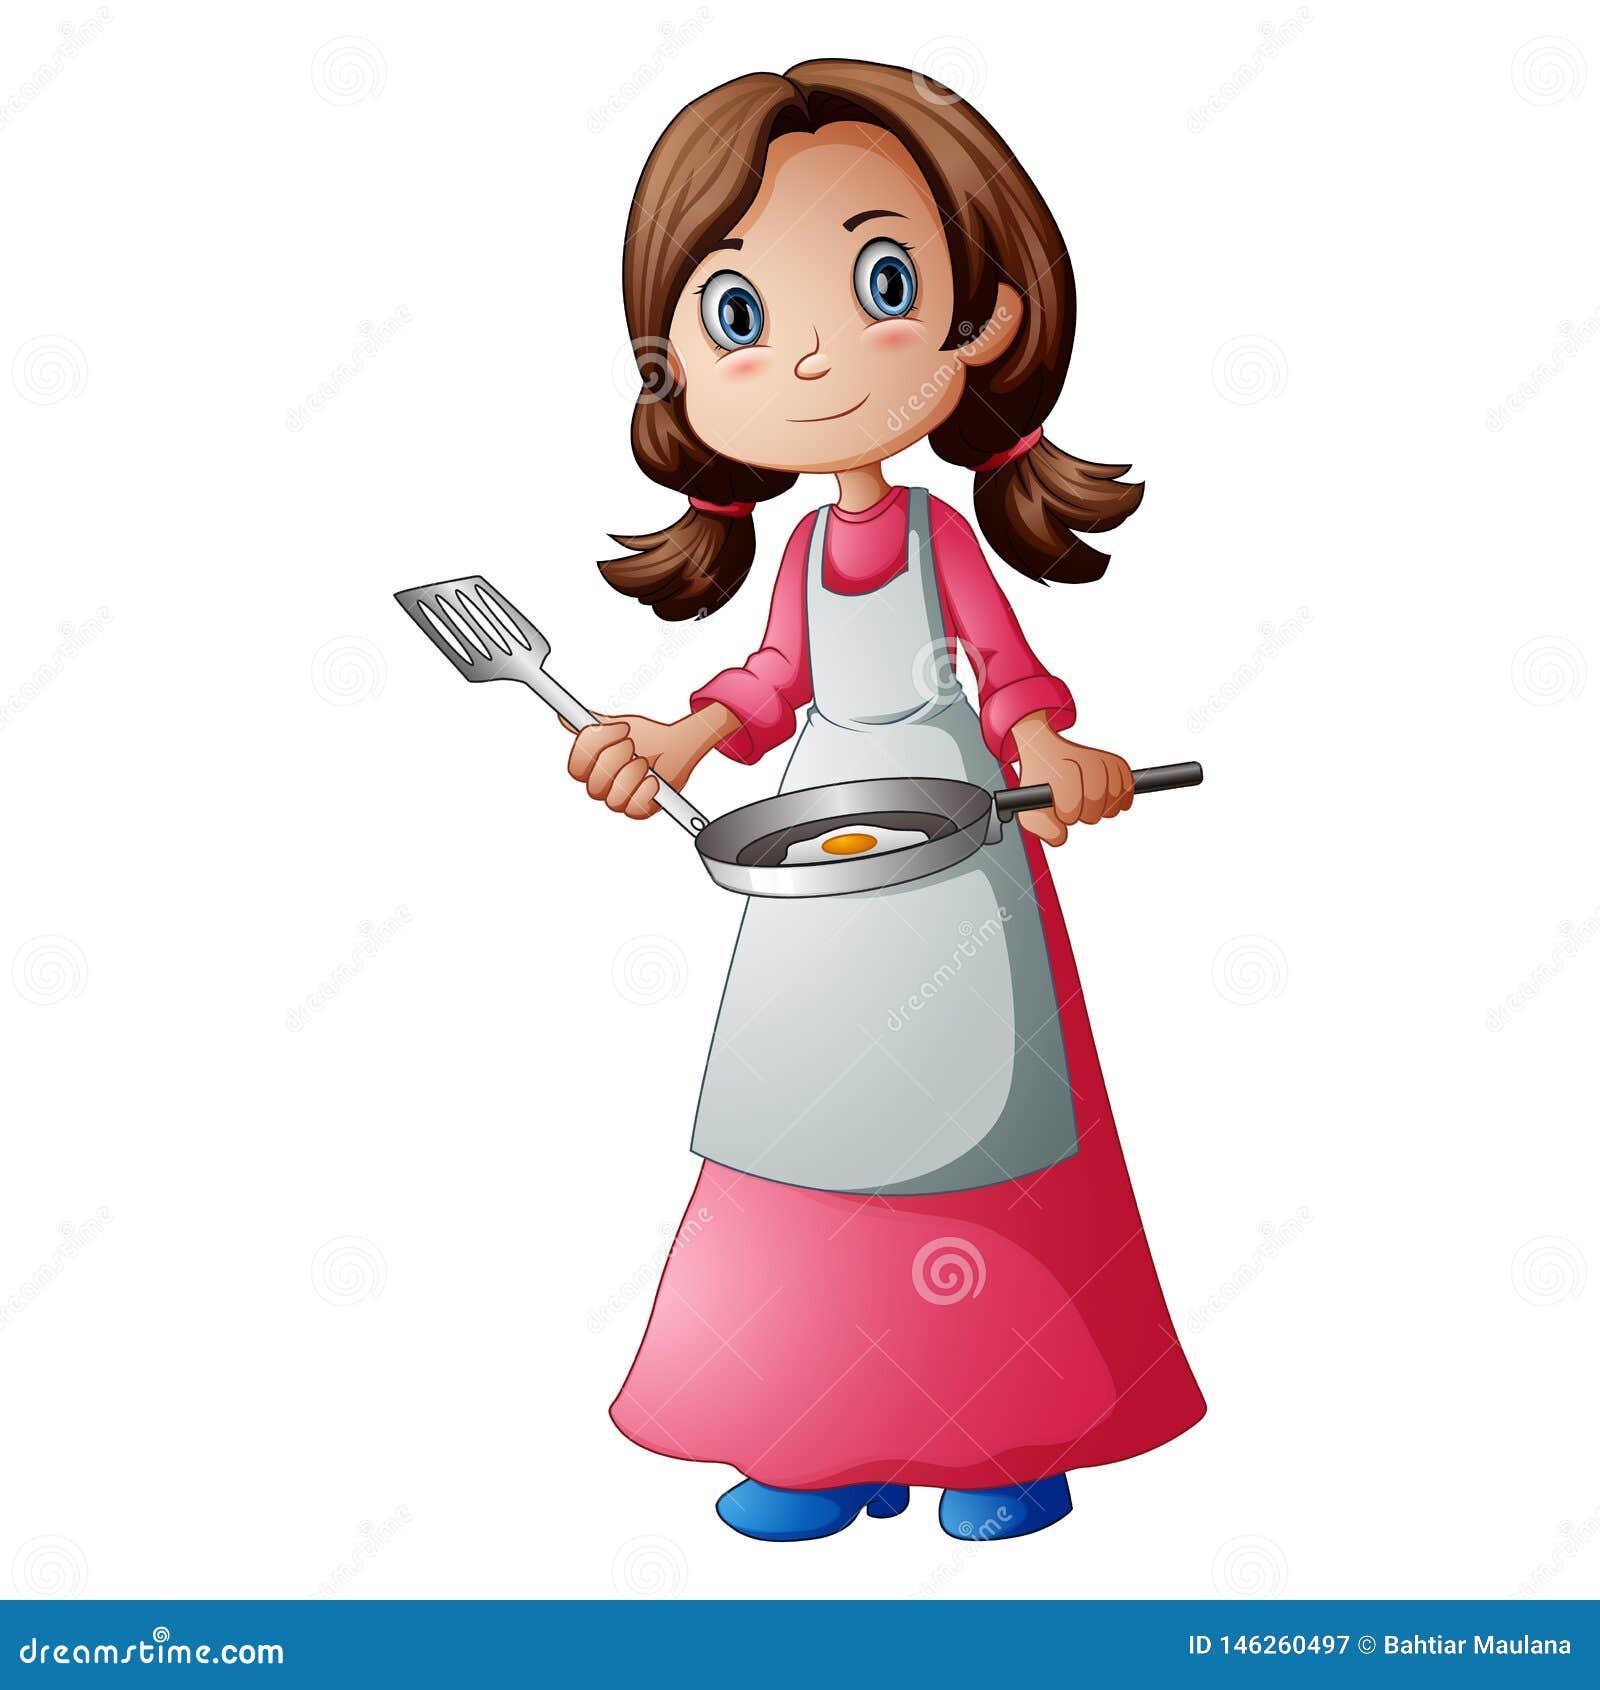 Happy woman cooking an egg stock vector. Illustration of heater - 146260497